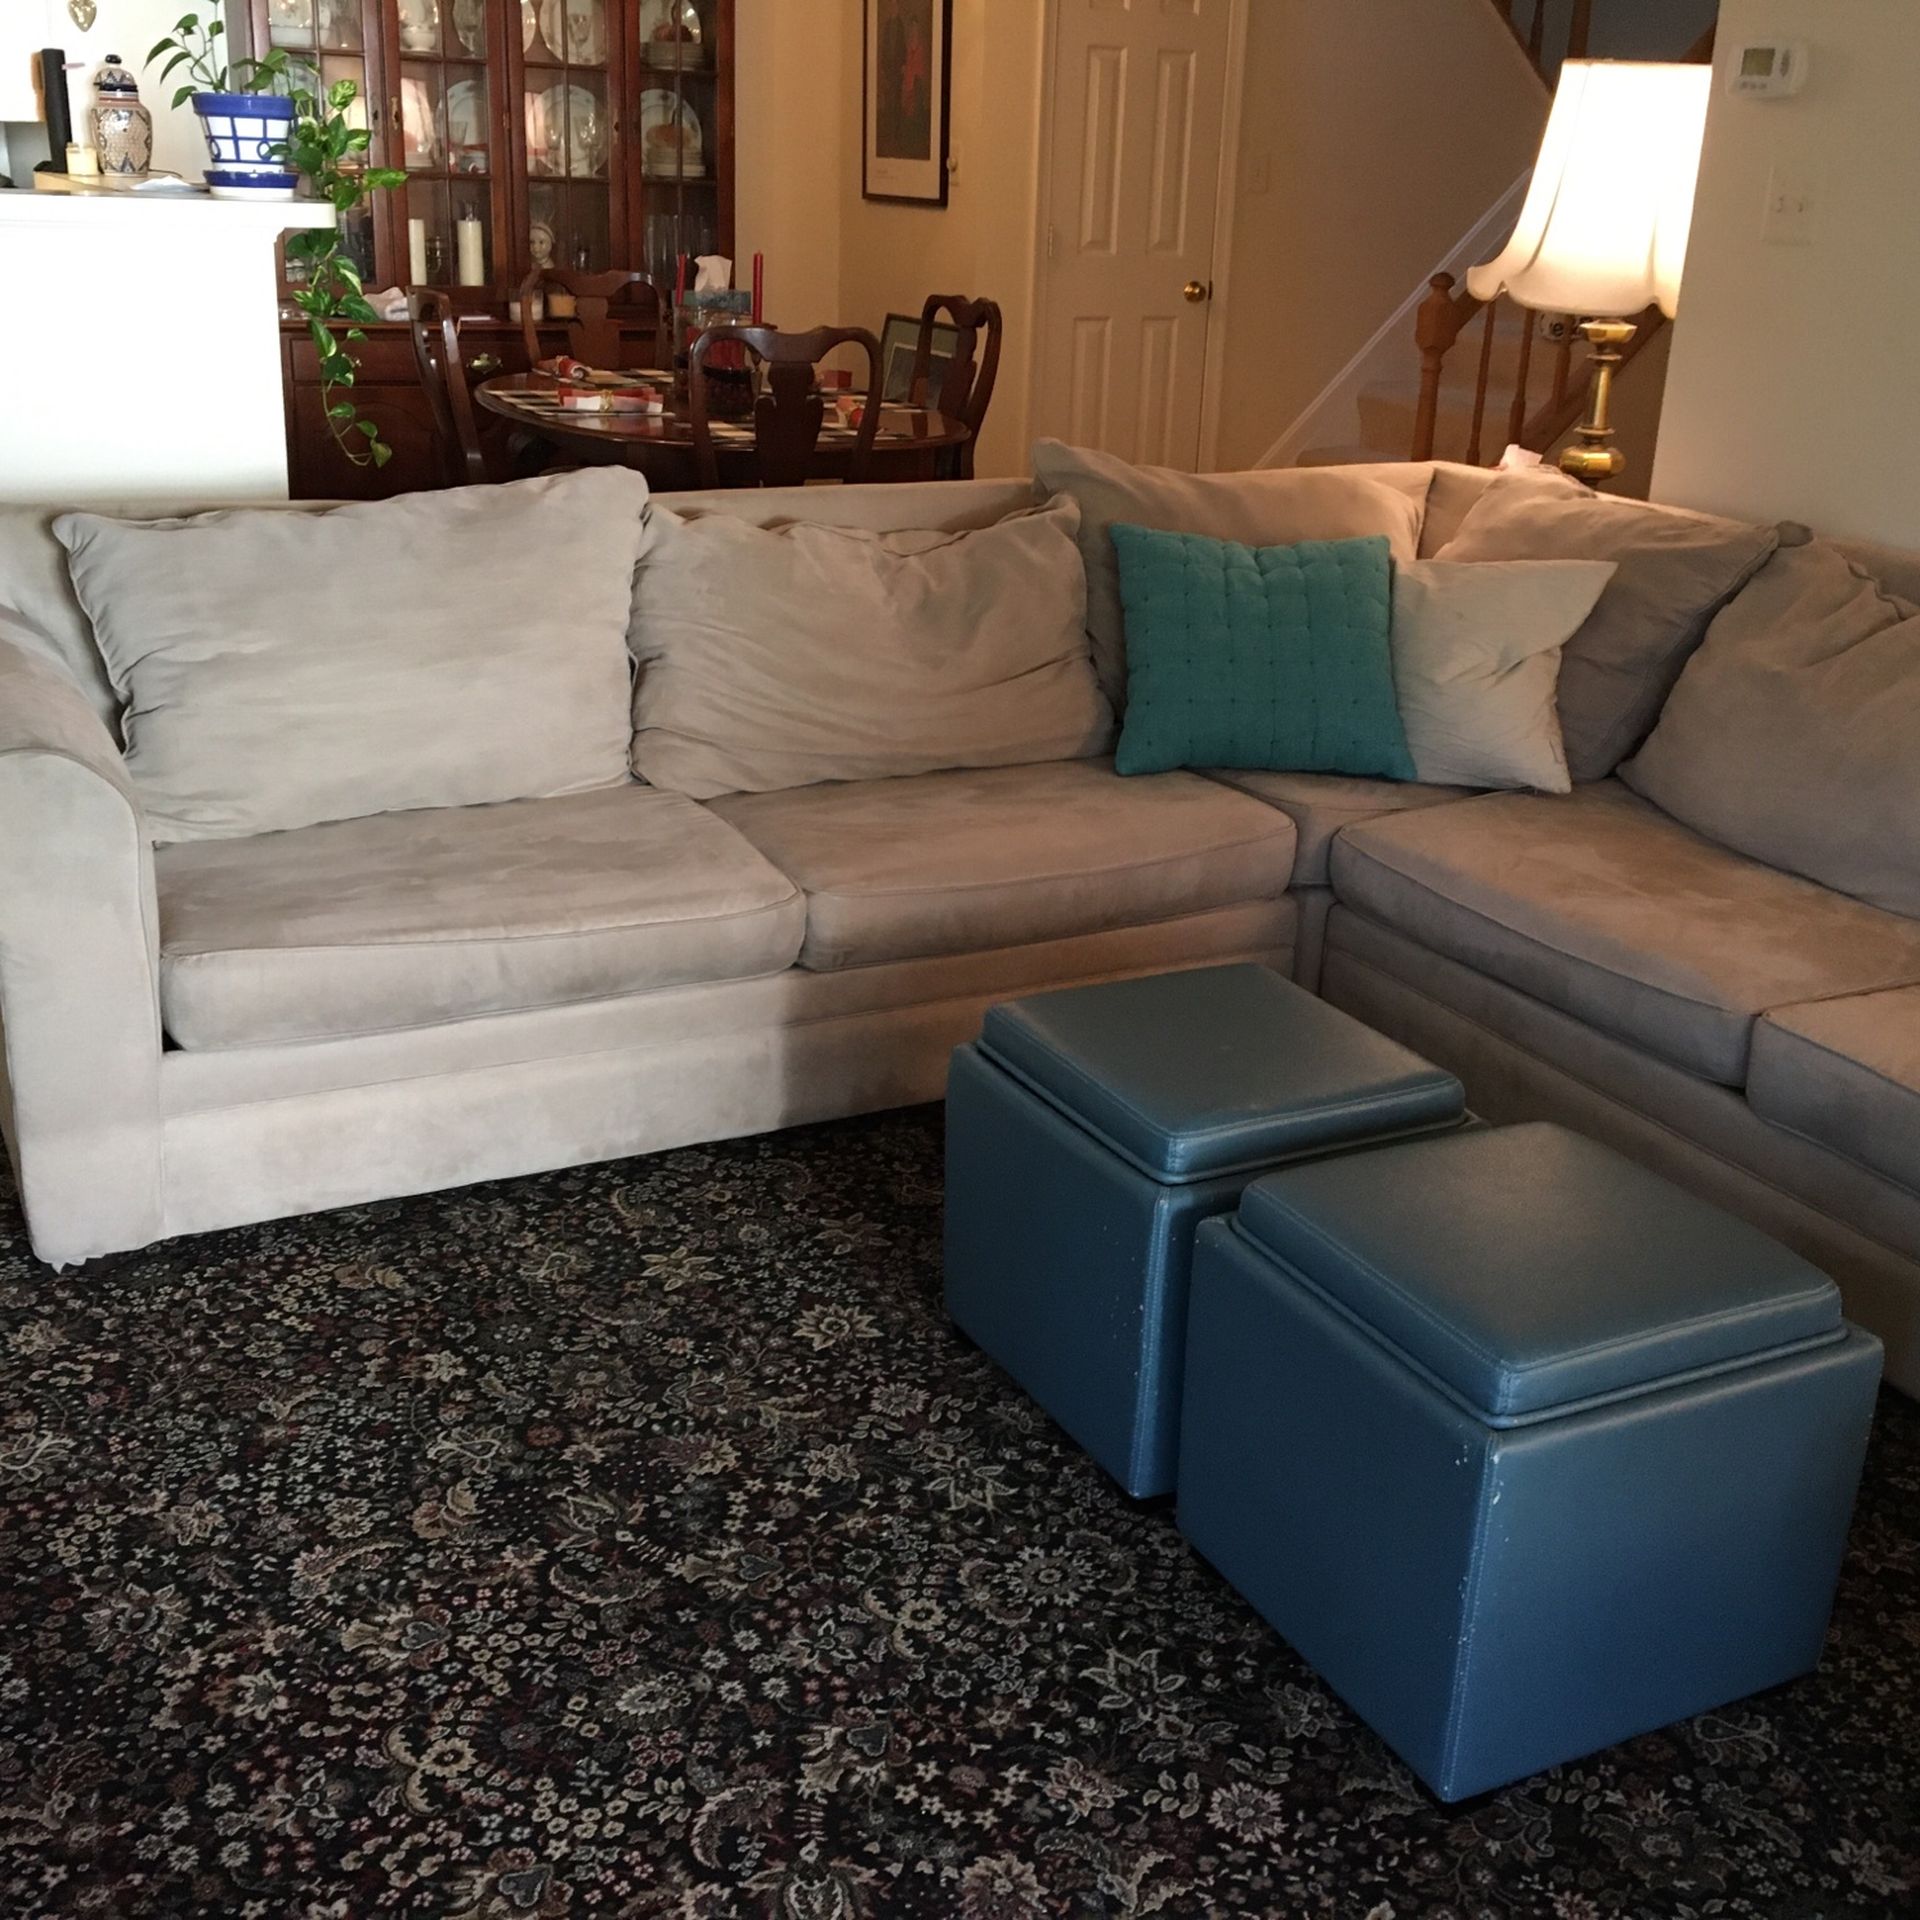 Better Photos Of Sectional Couch